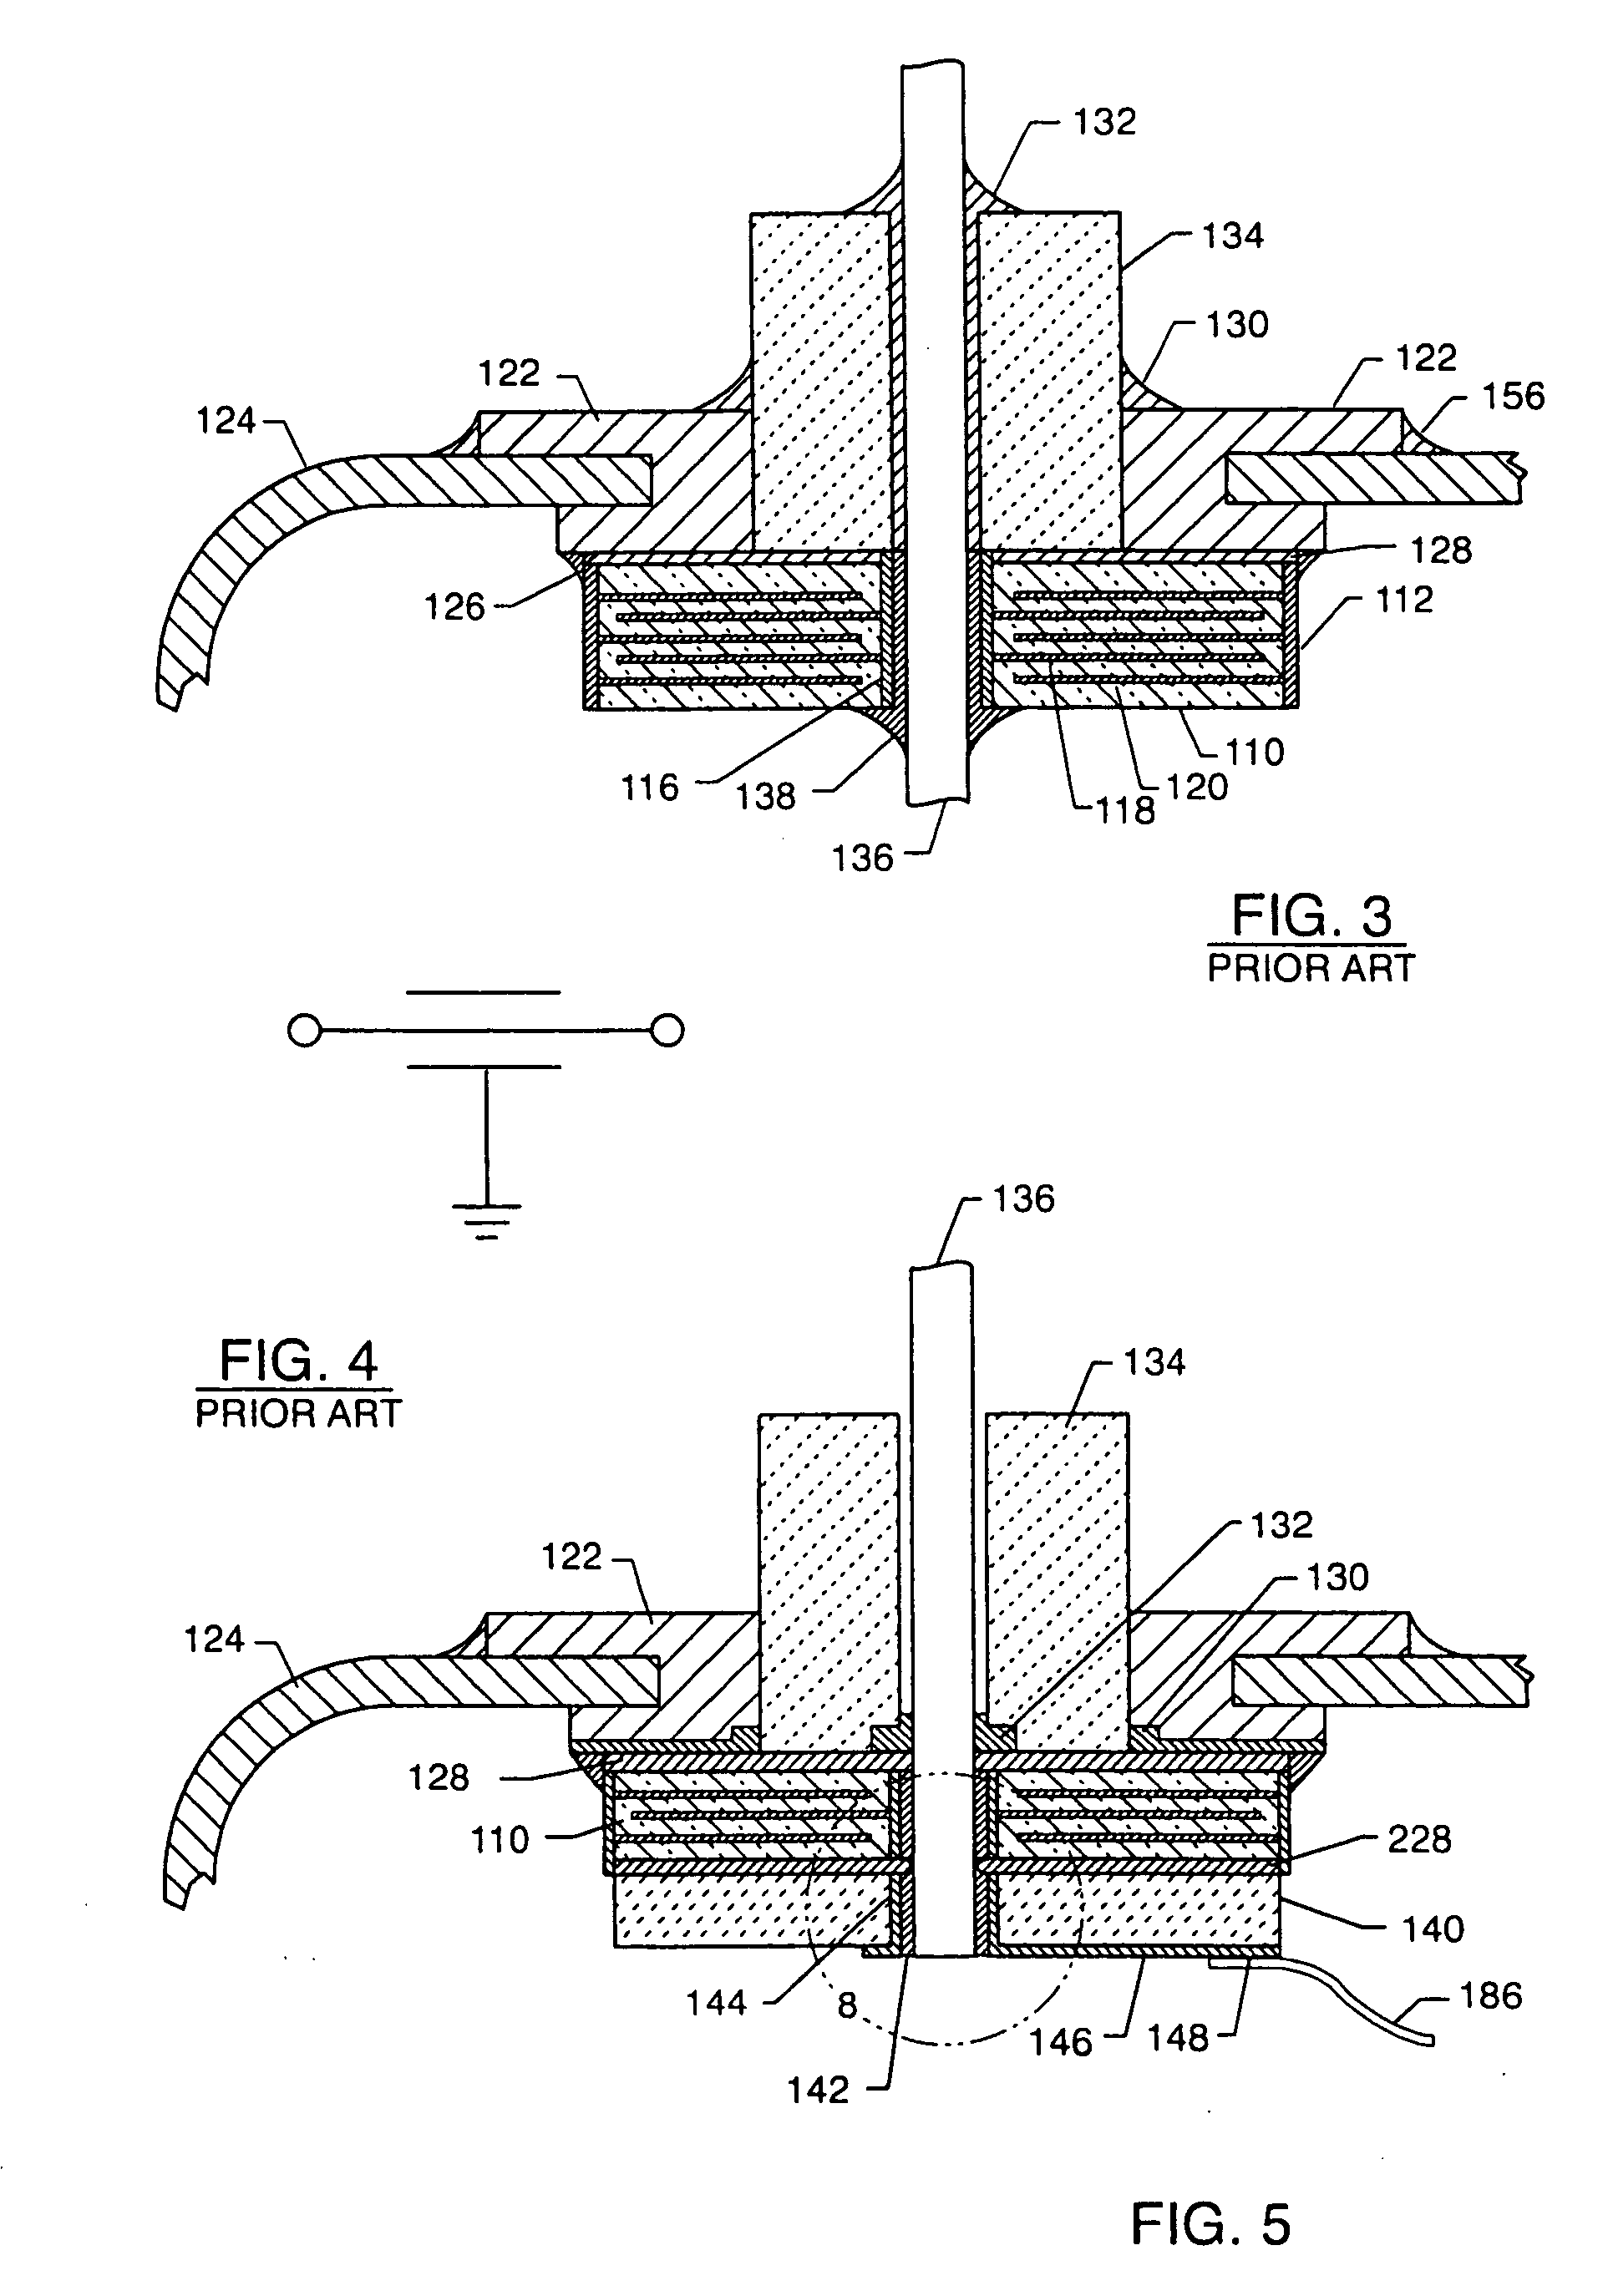 EMI filter terminal assembly with wire bond pads for human implant applications